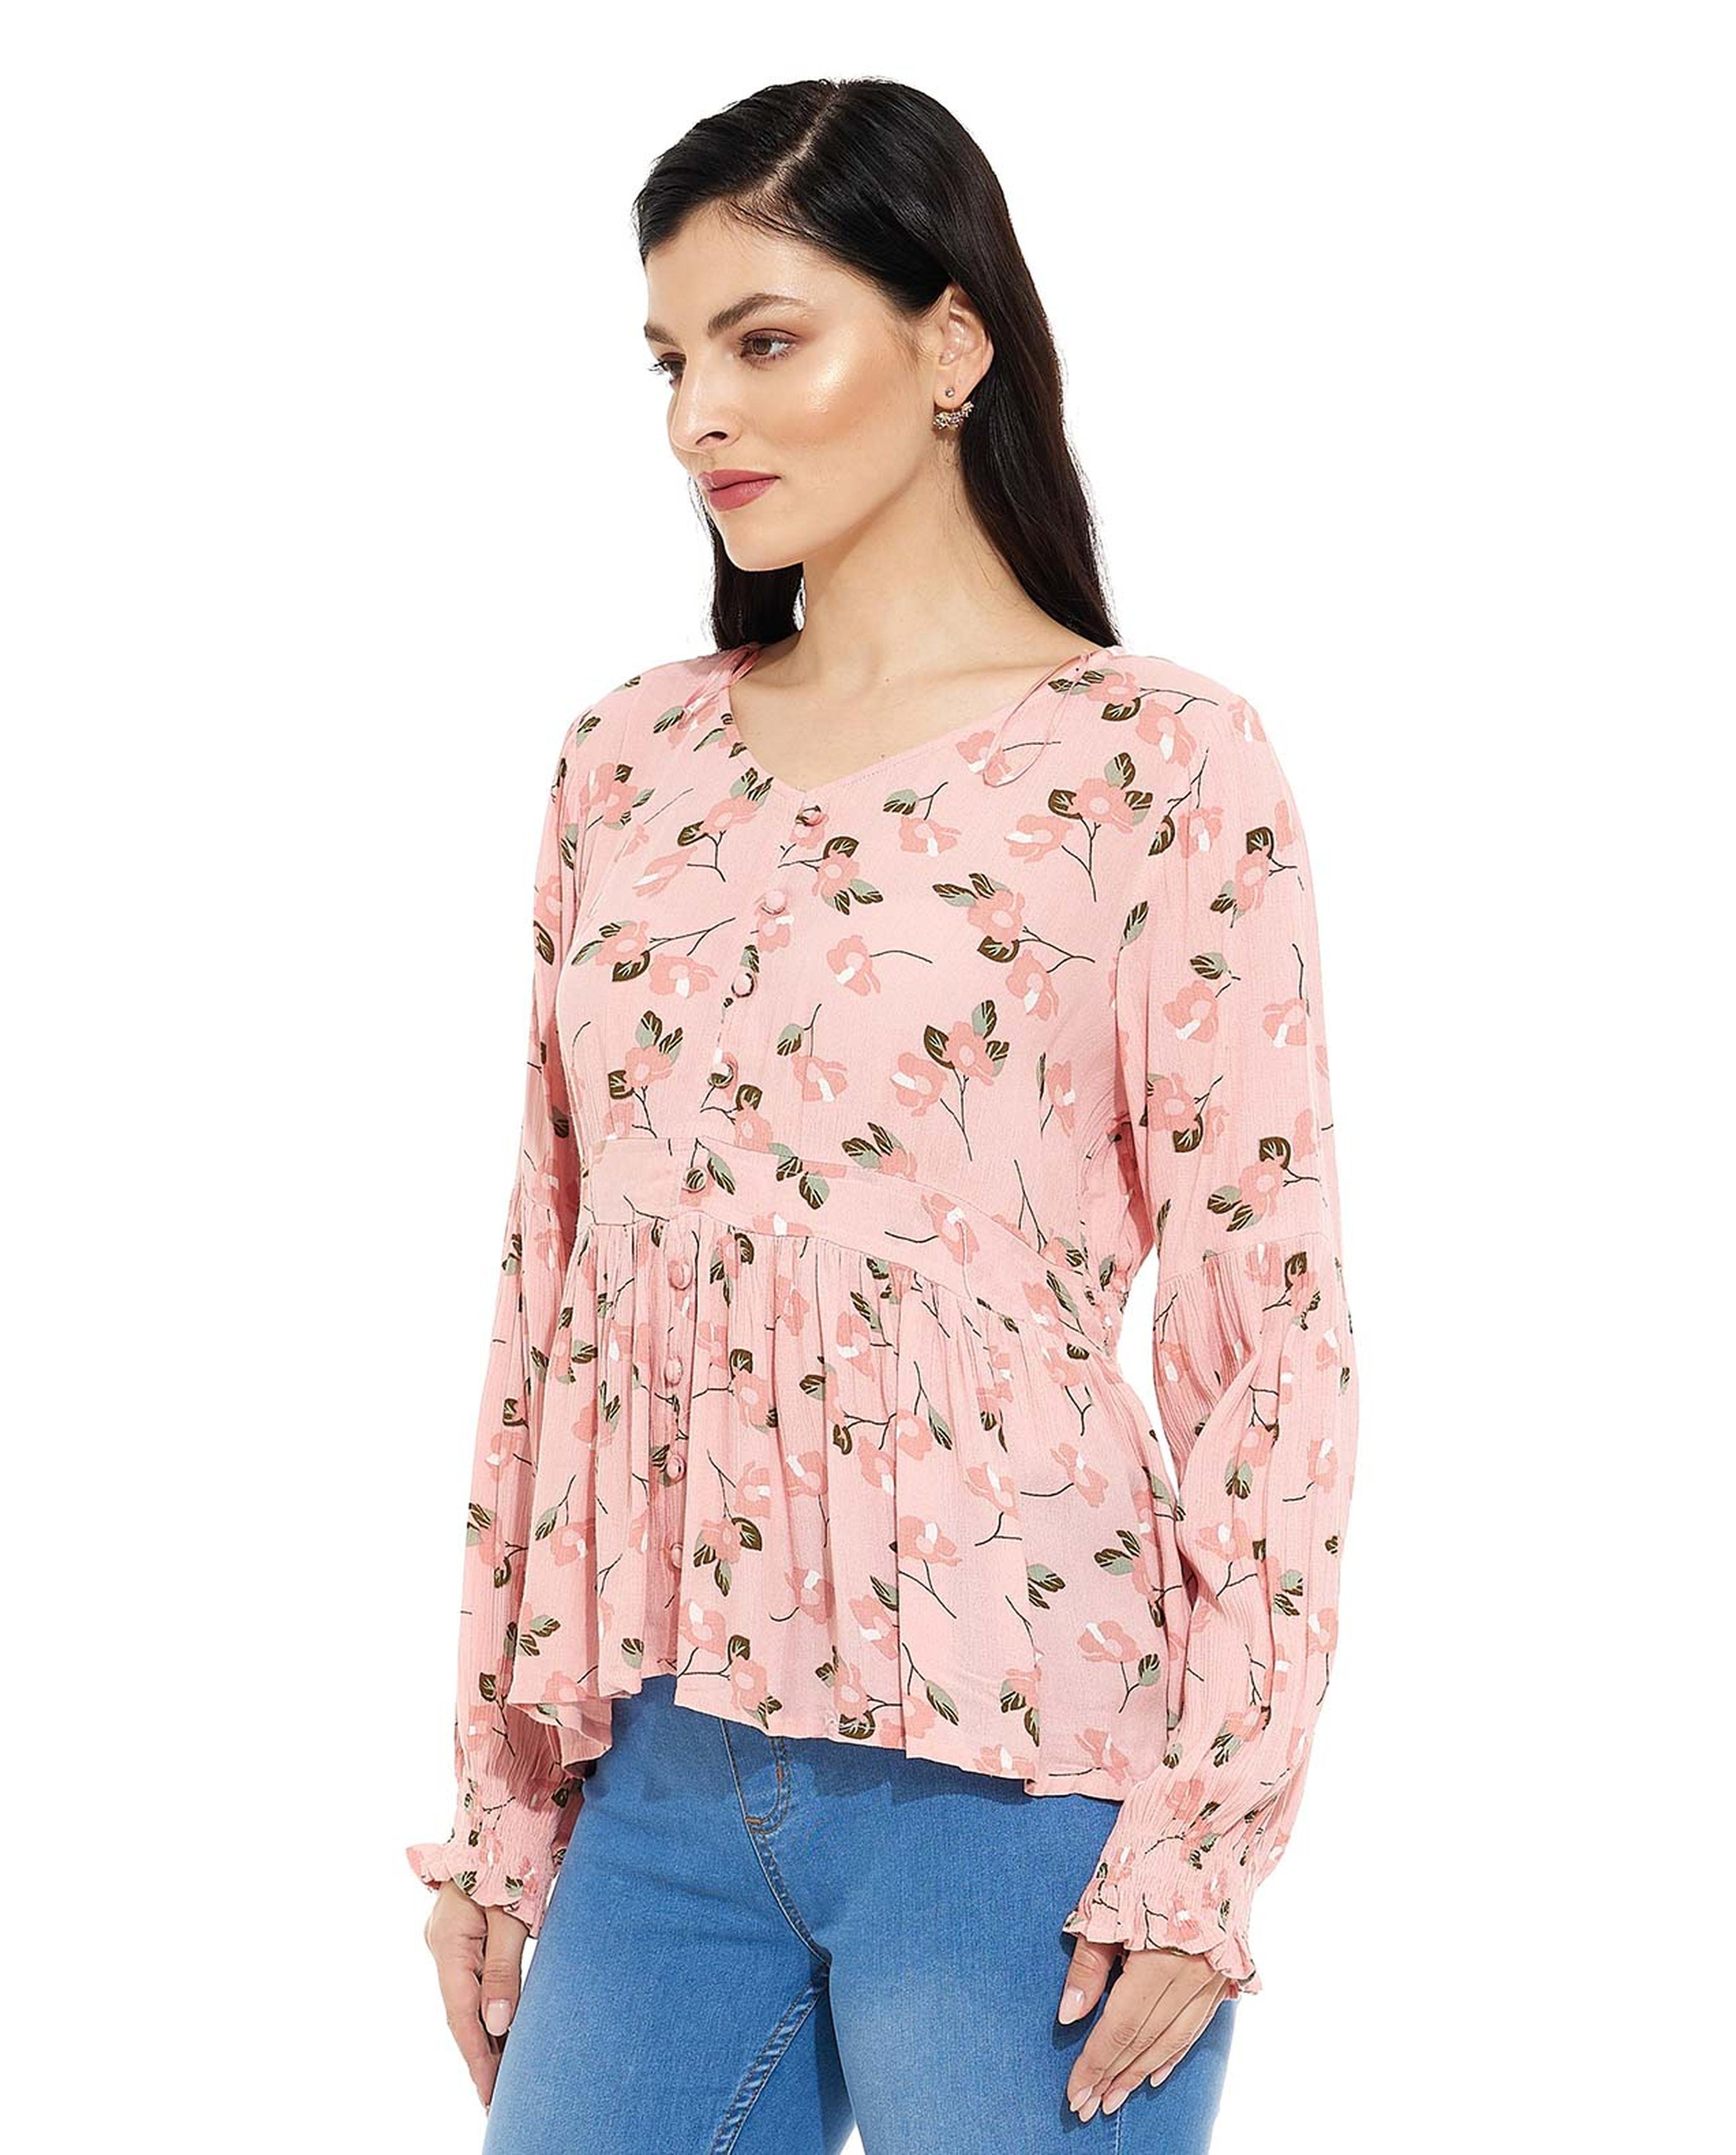 Floral Printed Top with V-Neck and Long Sleeves